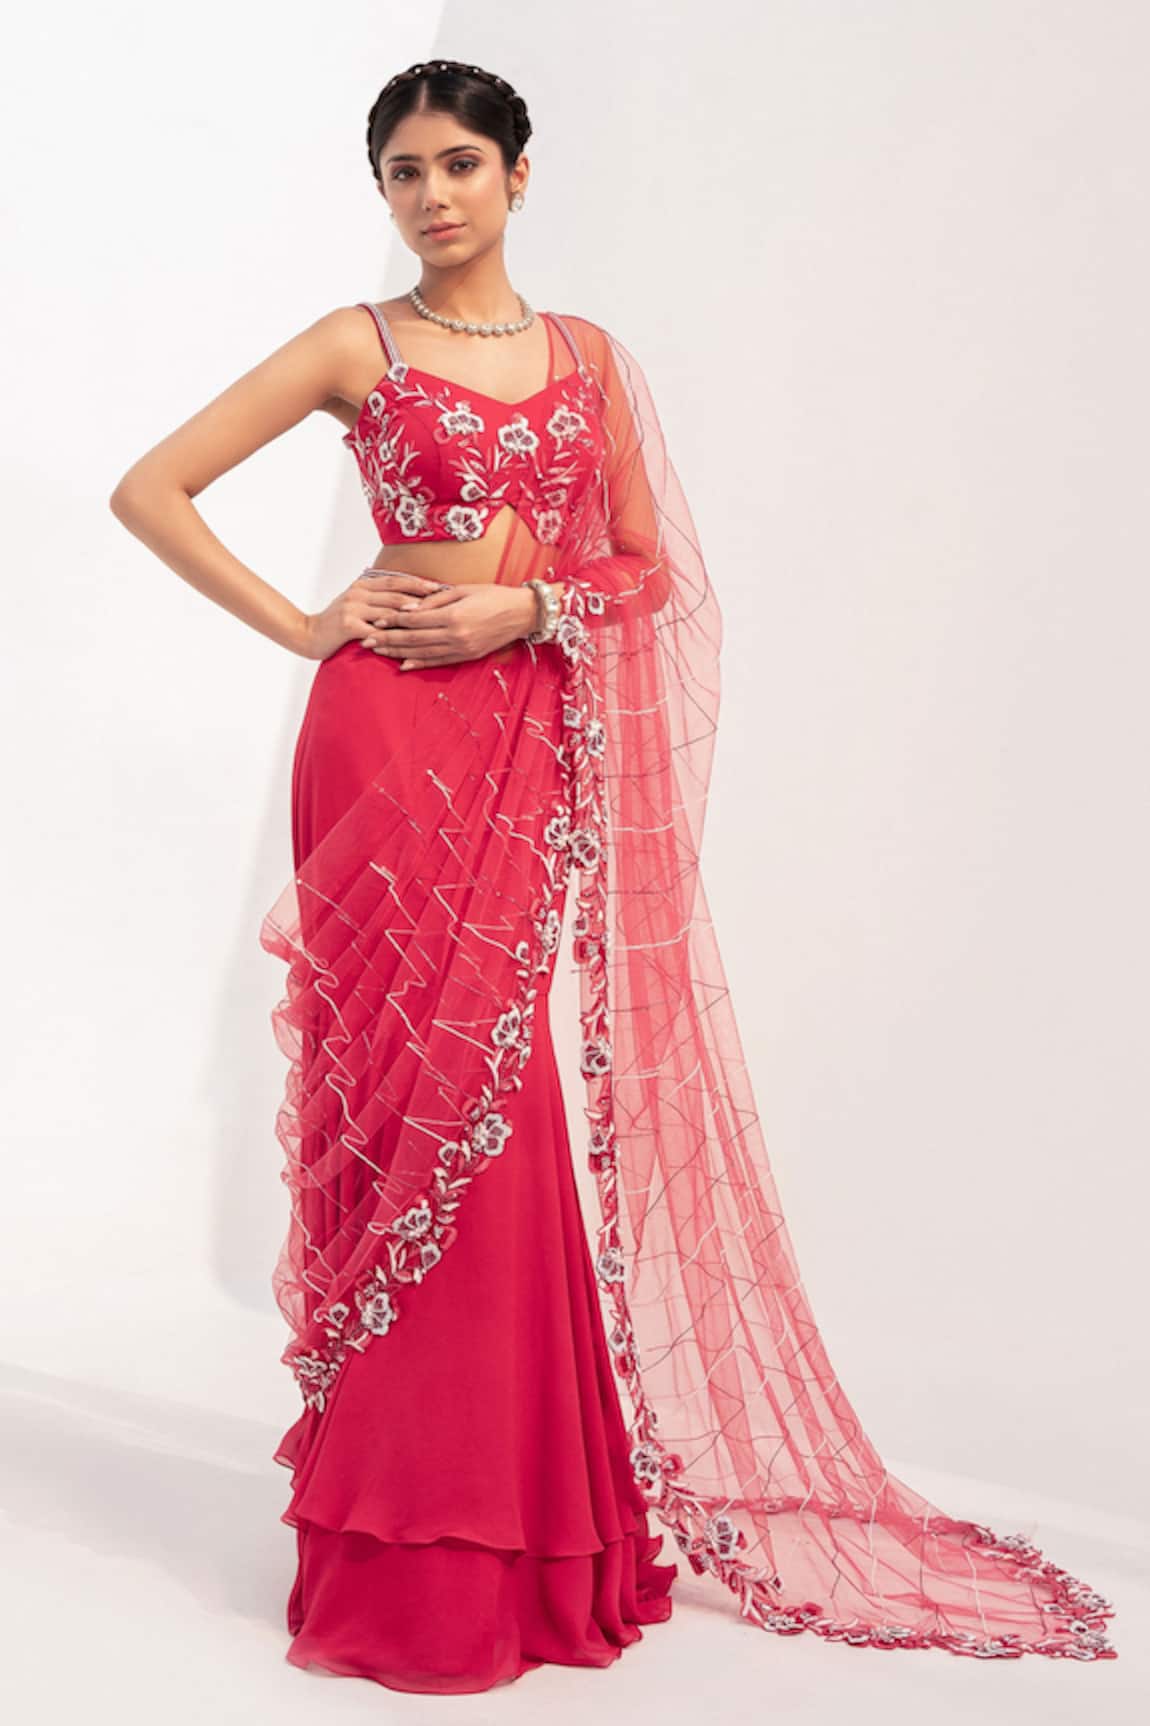 Nayna Kapoor Pre-Draped Floral Embroidered Saree With Blouse